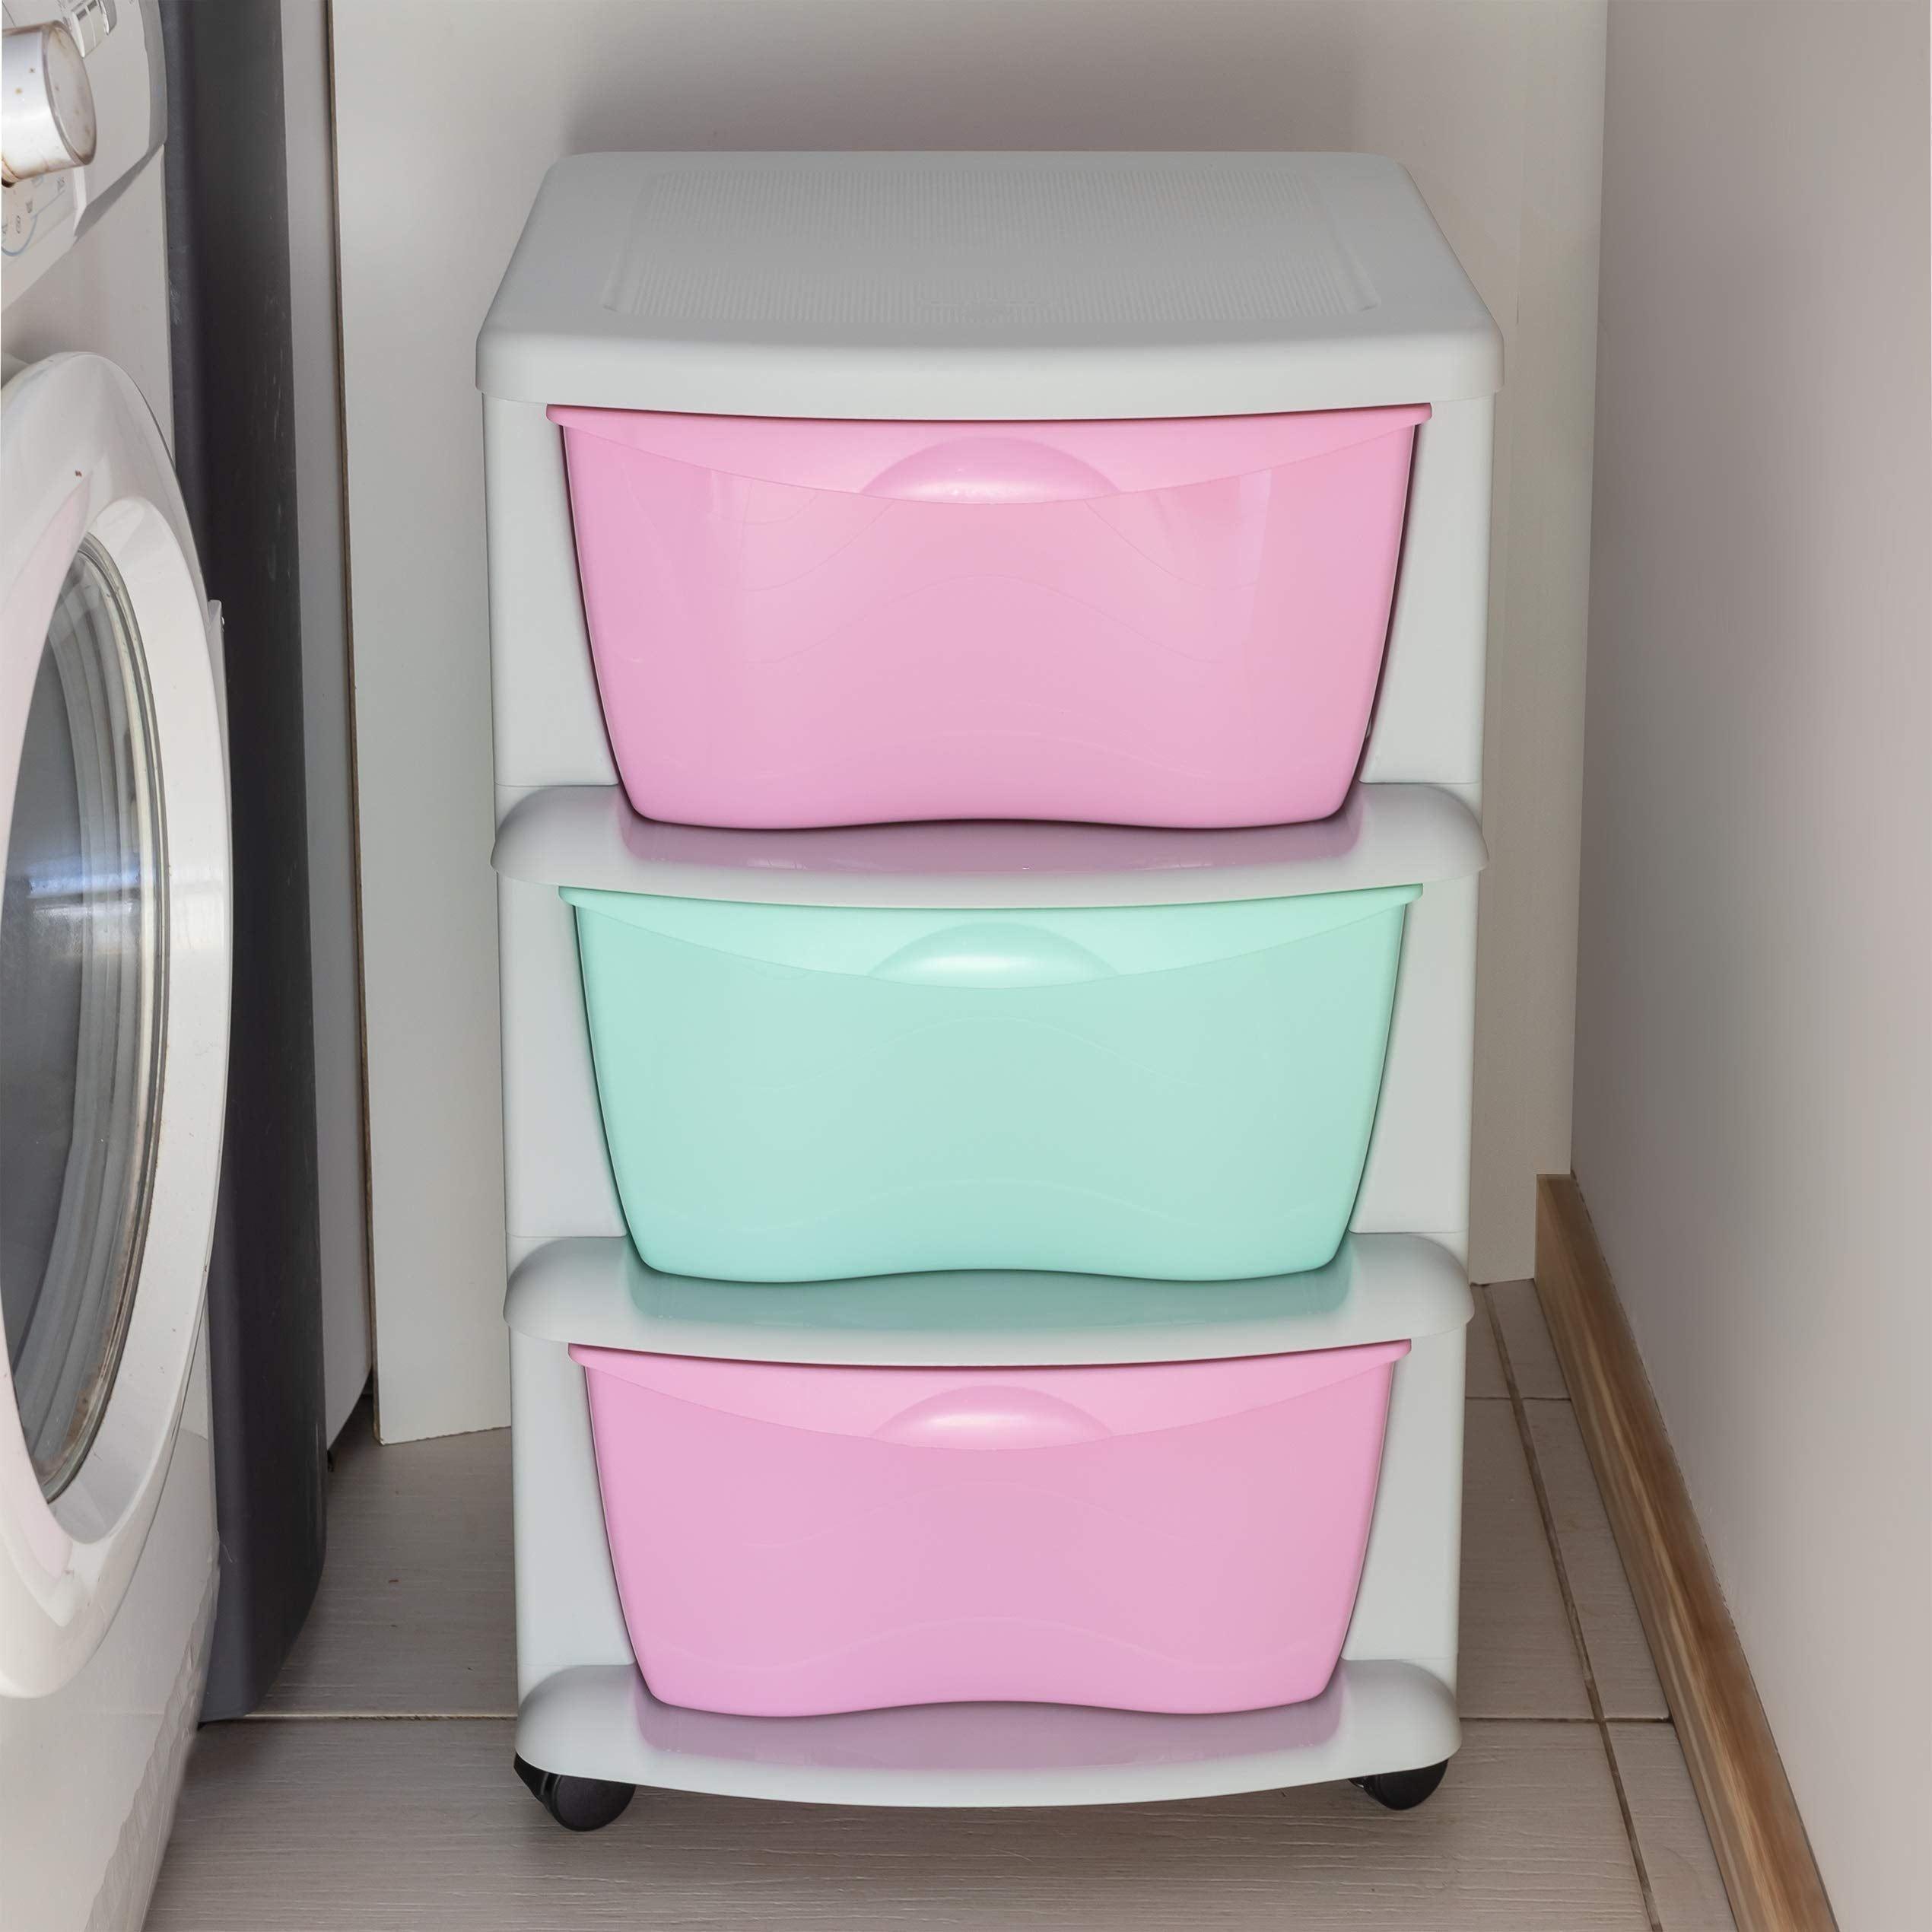 Maxi Nature Plastic Storage Drawers on Wheels - Sturdy Frame, Durable, Heavy Duty Organiser - 3 Tier Large Storage Unit for Kids Bedroom, Bathroom, Office - Made in Europe - Pink/Blue 3